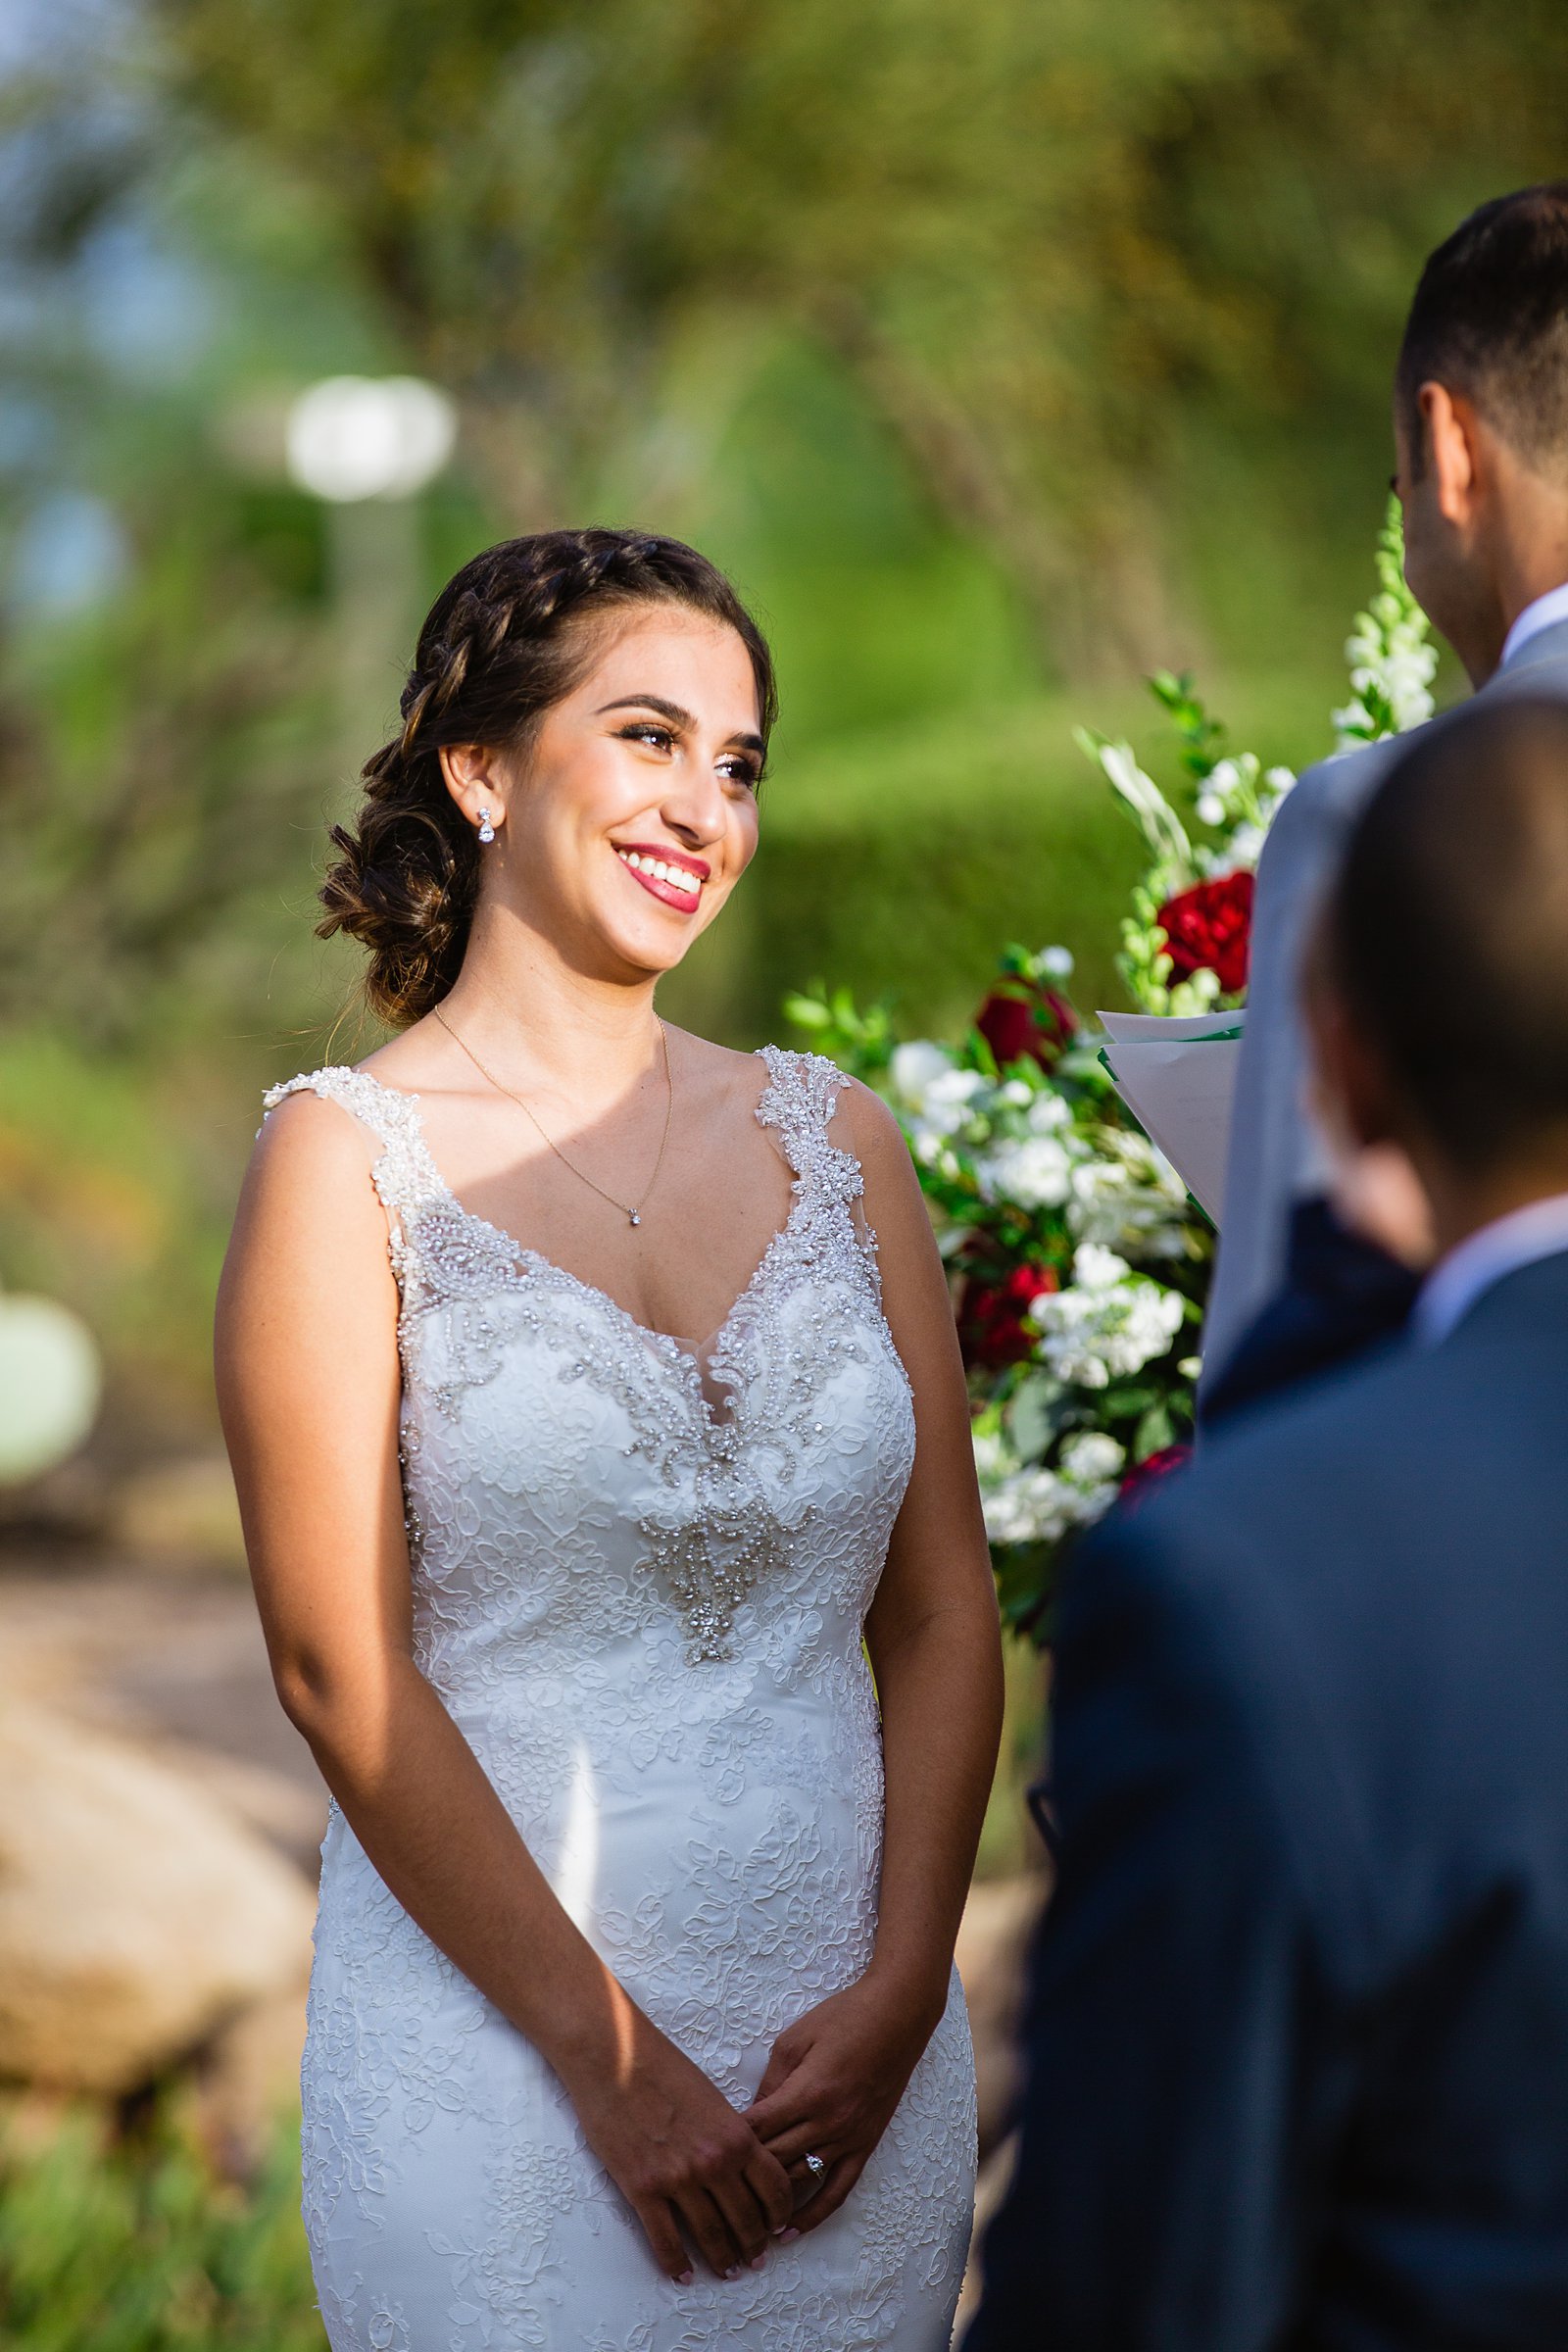 Bride looking at her groom during their wedding ceremony at Troon North by Scottsdale wedding photographer PMA Photography.